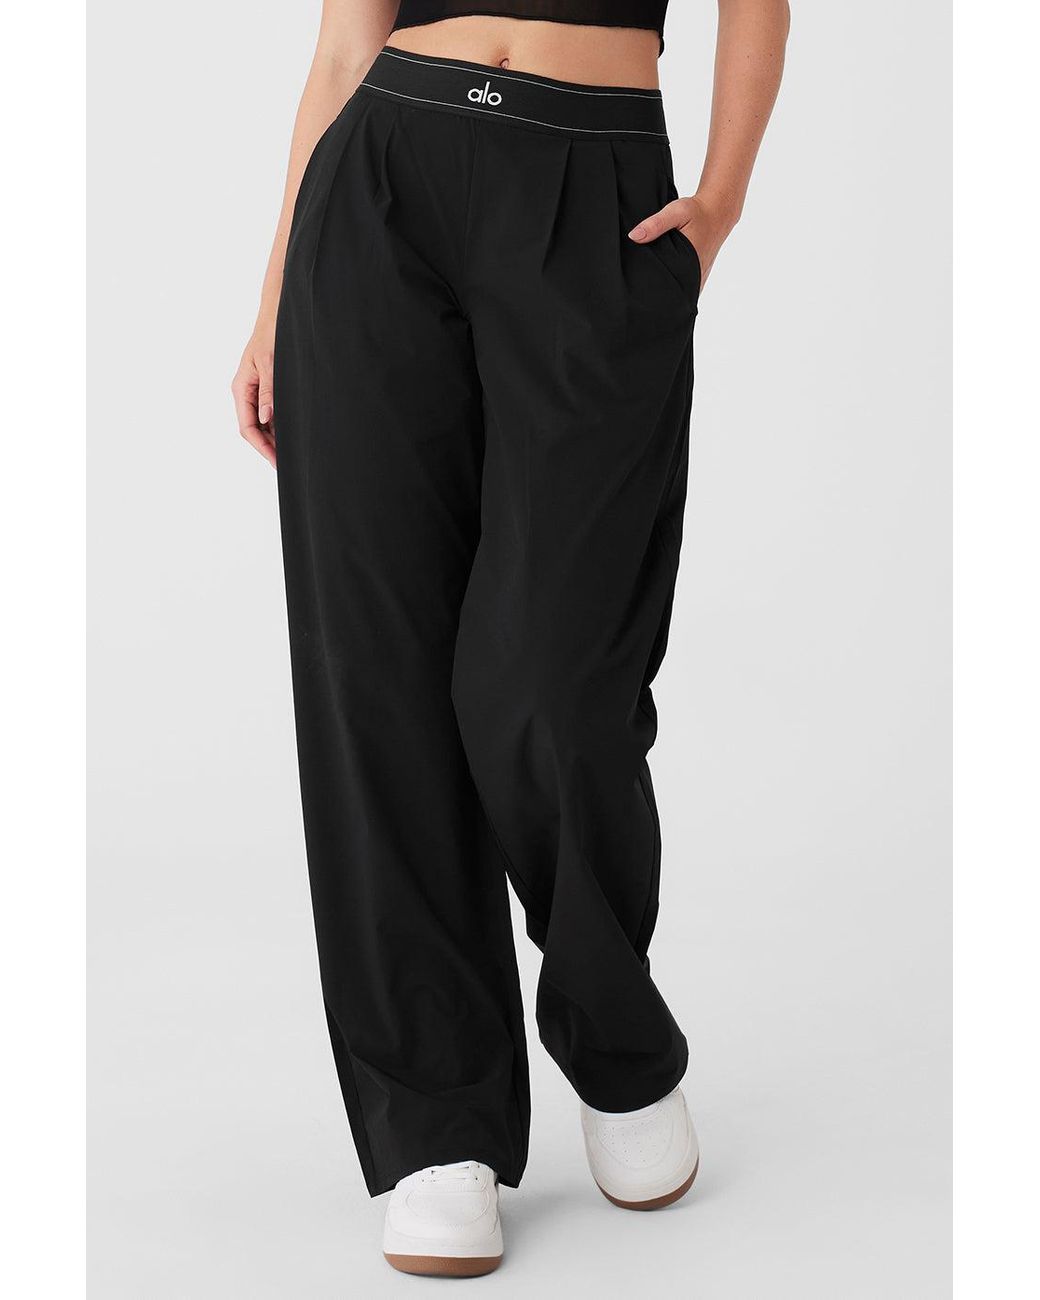 Alo Yoga Suit Up Trouser in Black | Lyst Canada